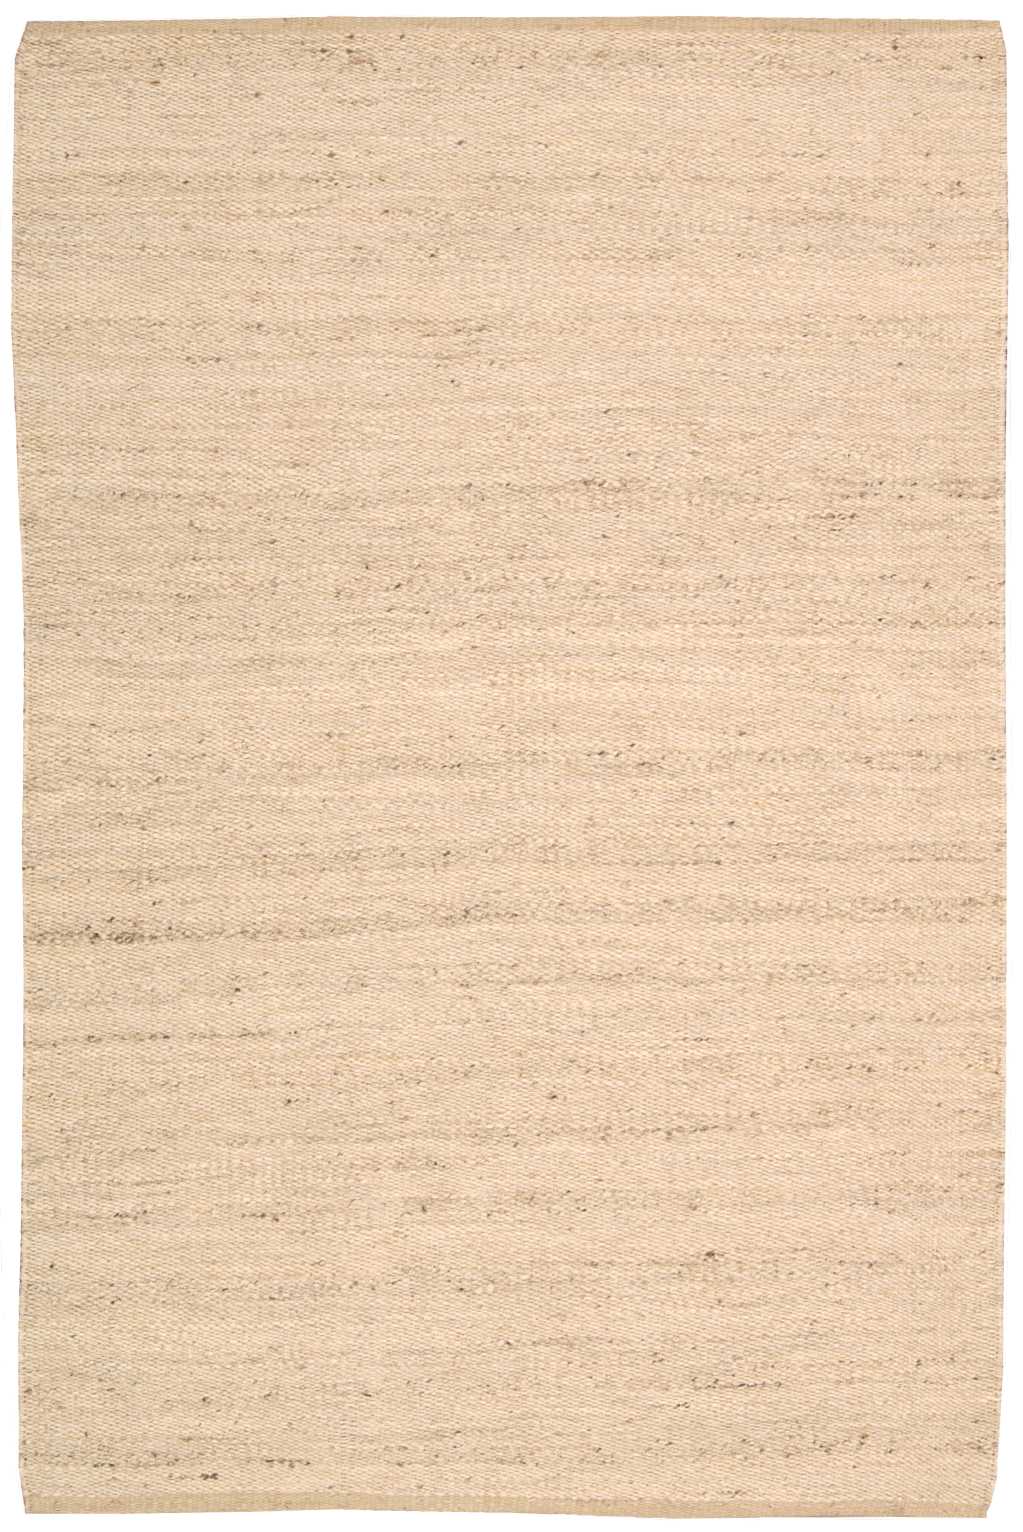 Kathy Ireland Paradise Garden Tranquil Gardens Wheat Area Rug by Nourison